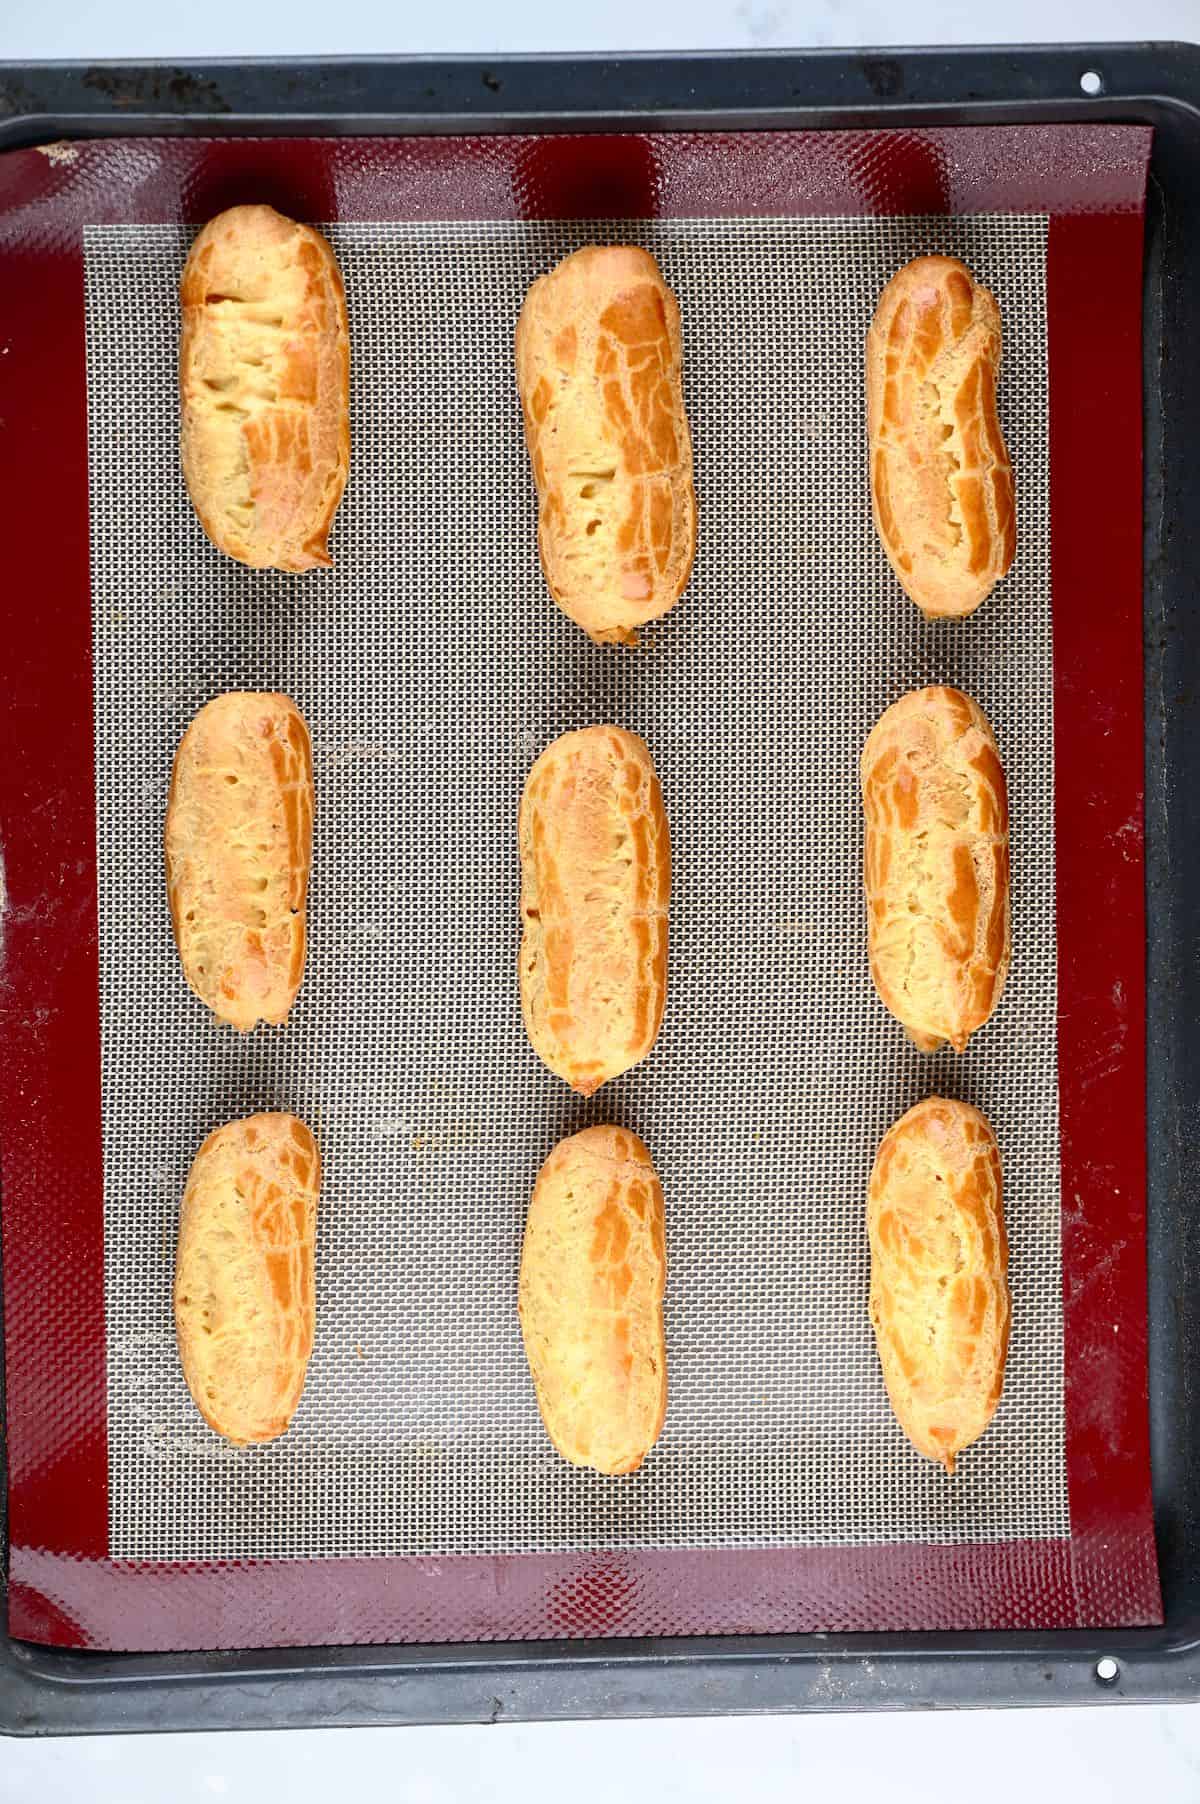 Baked choux pastry in the shape of eclairs